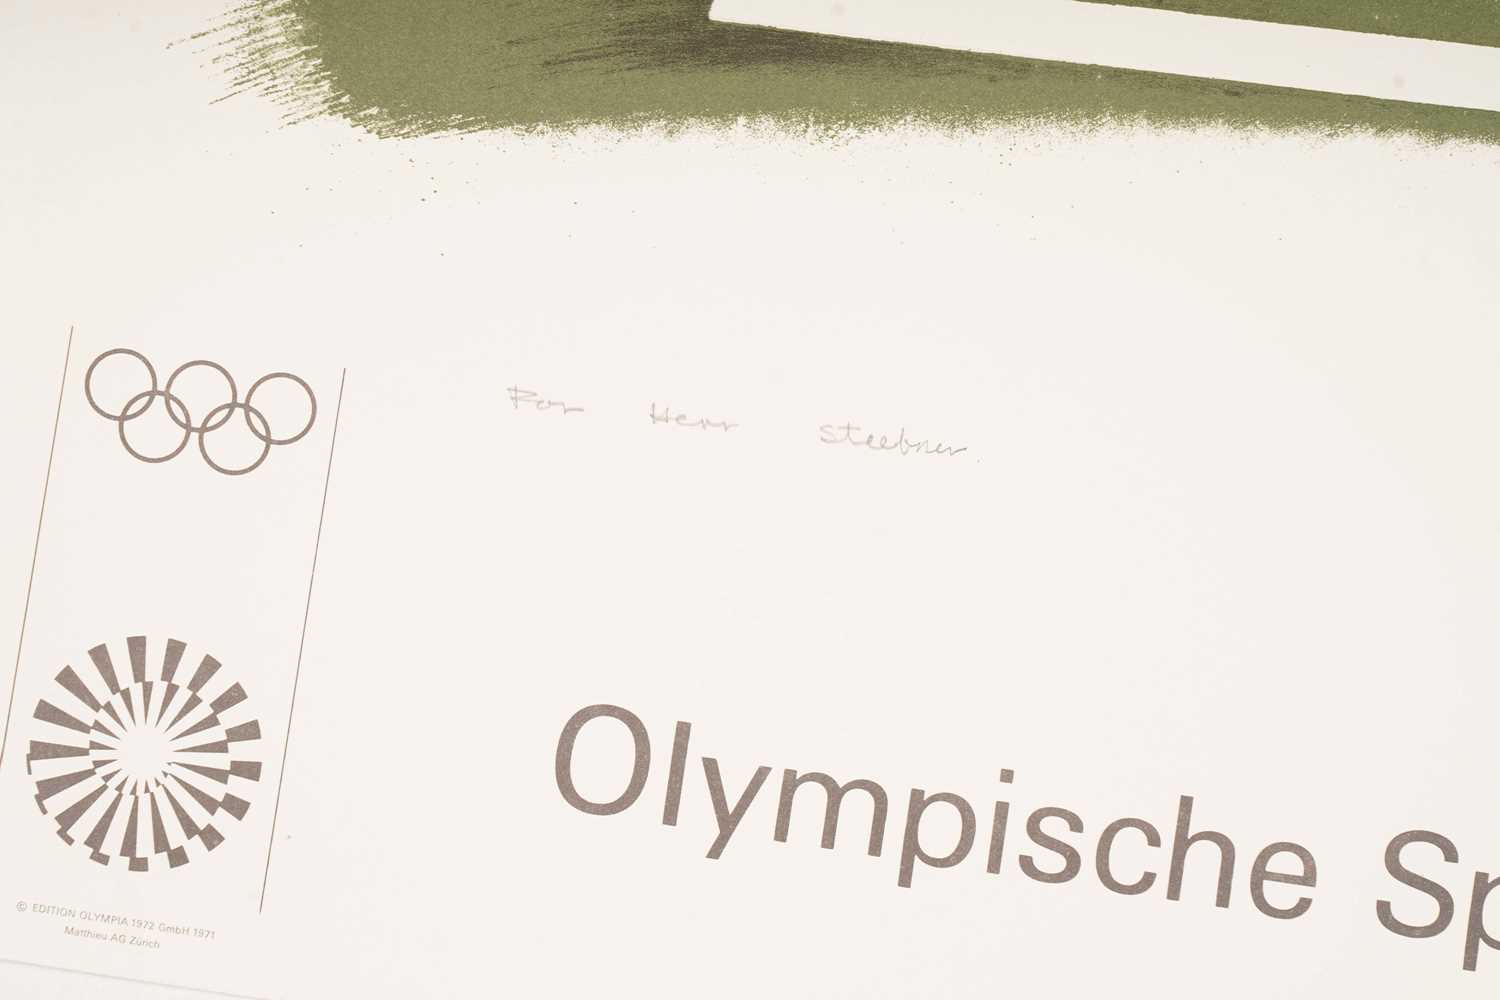 Peter Philips - Olympic Games Munich 1972 poster | signed artist's proof serigraph - Image 3 of 4